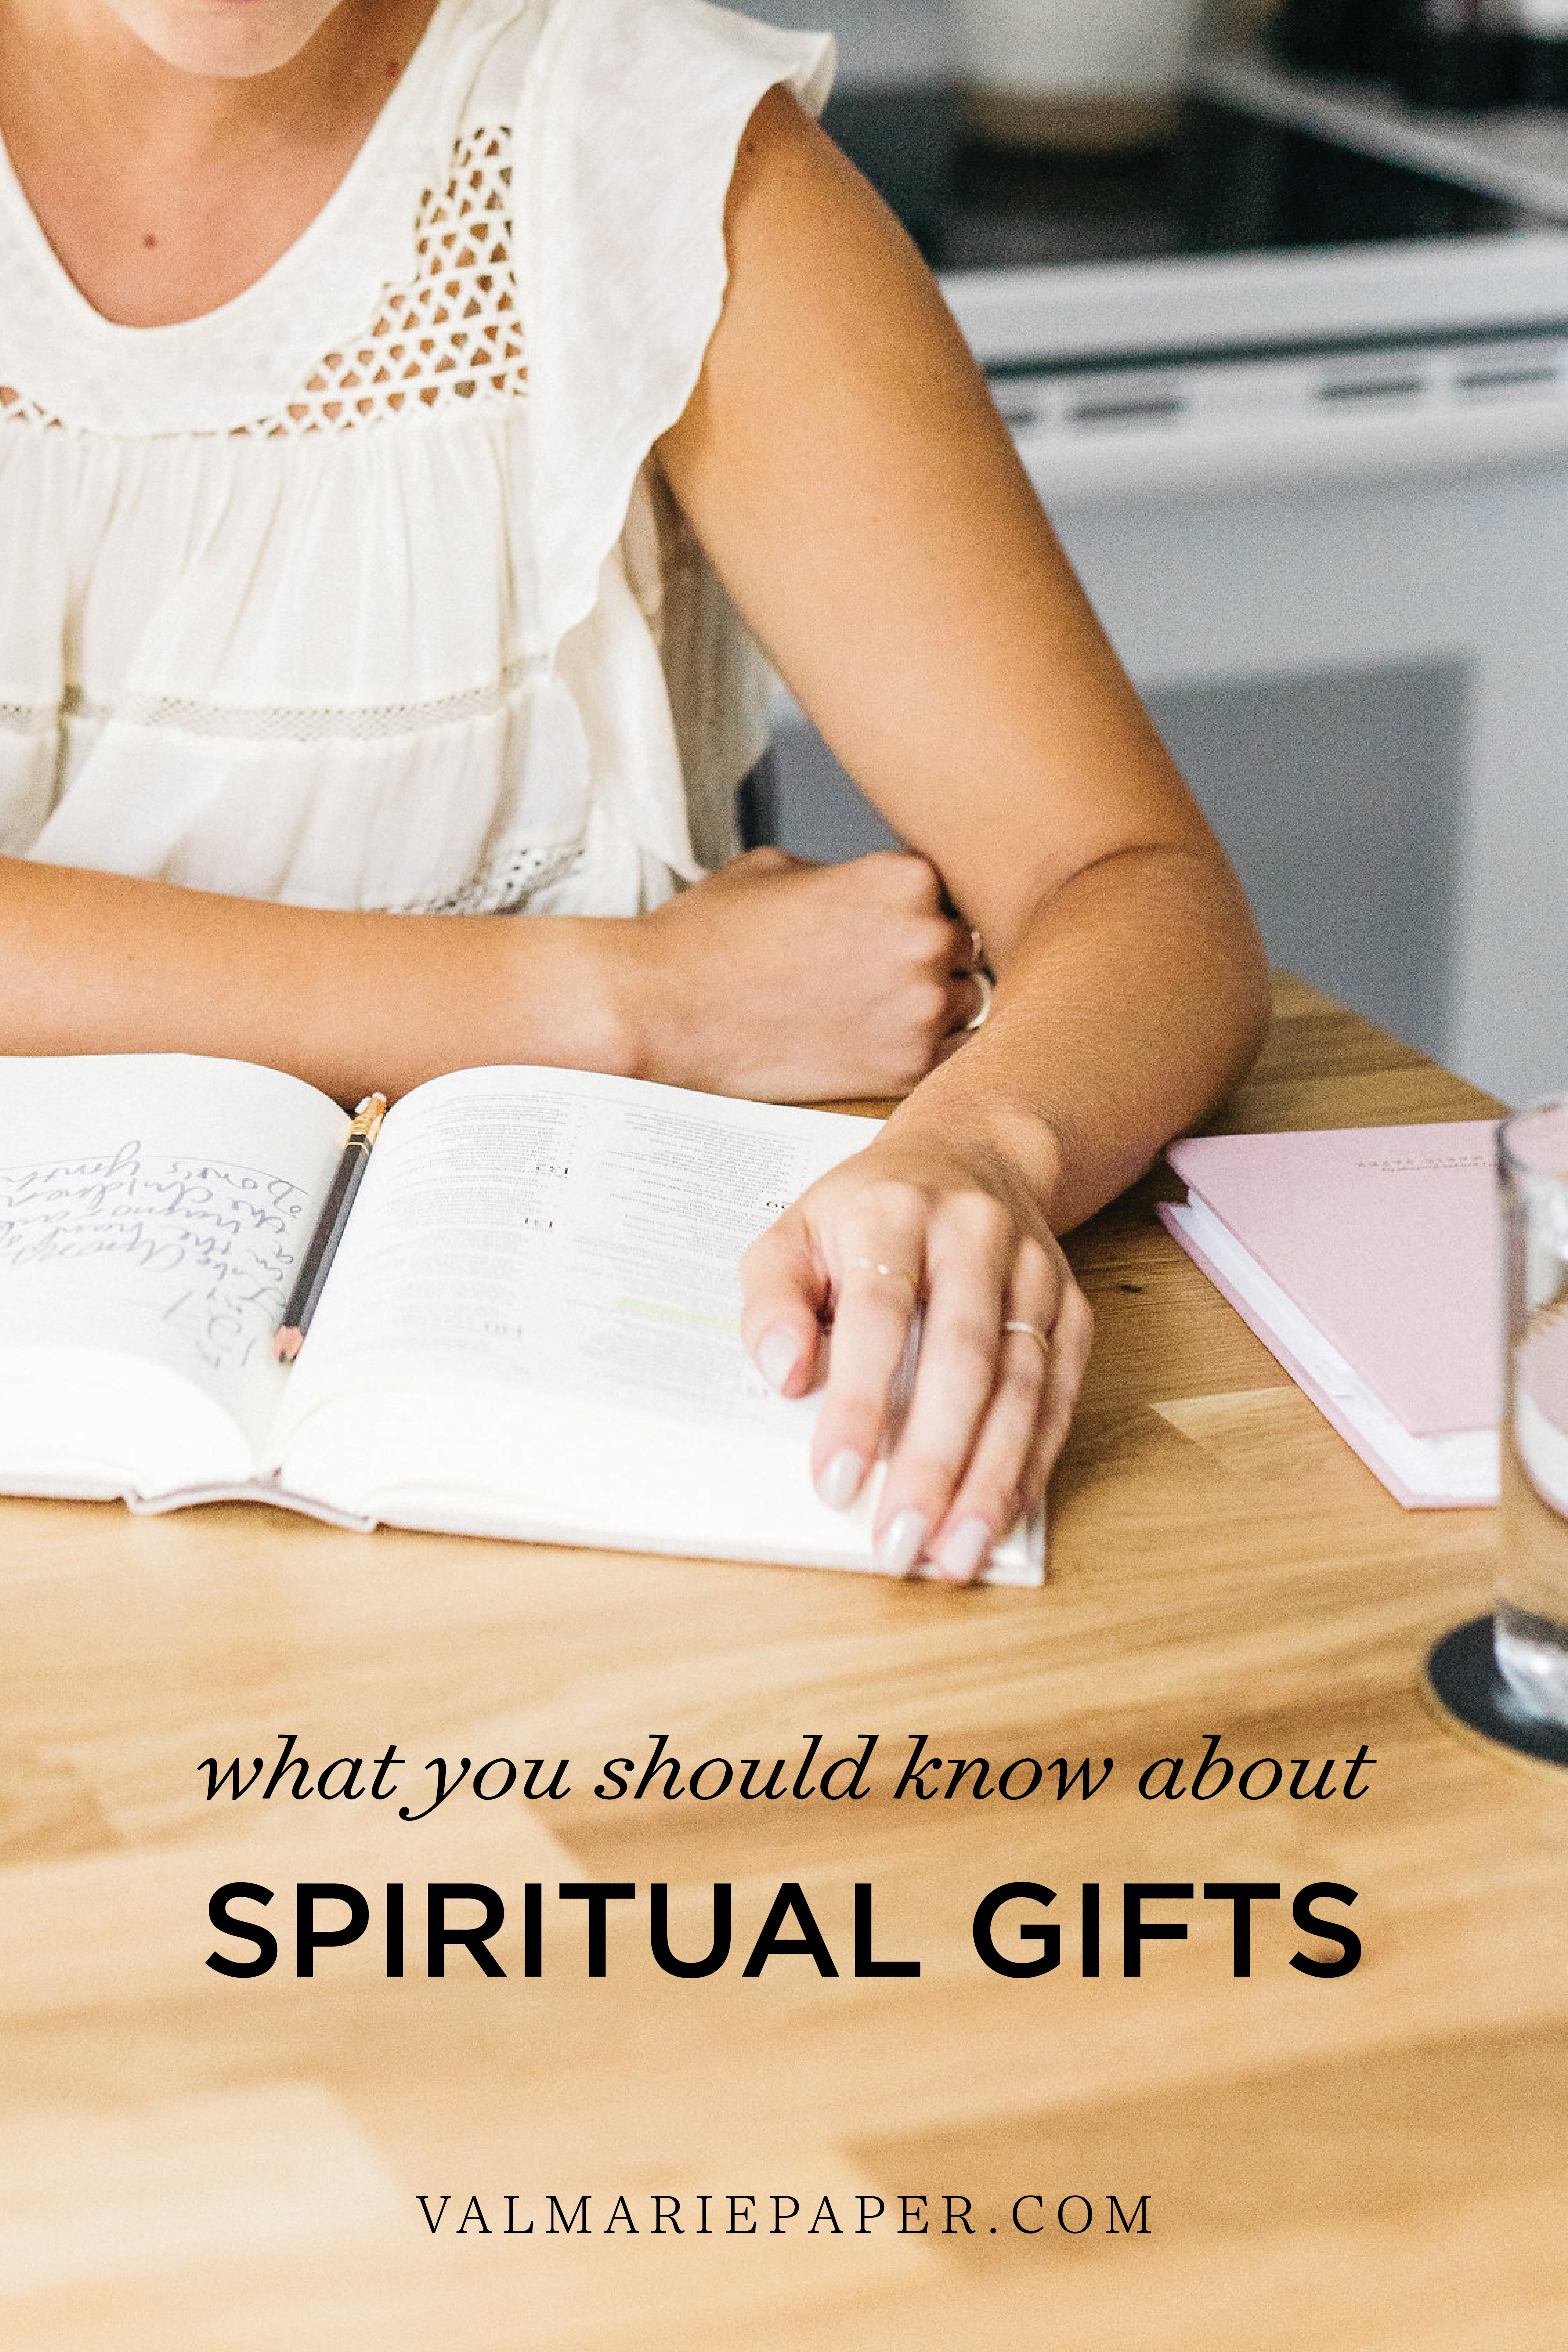 Are we really embracing our spiritual gifts? by Valerie Woerner | Val Marie Paper, Bible study, prayer, women's ministry, Holy Spirit, test, quiz personality, Christian, faith